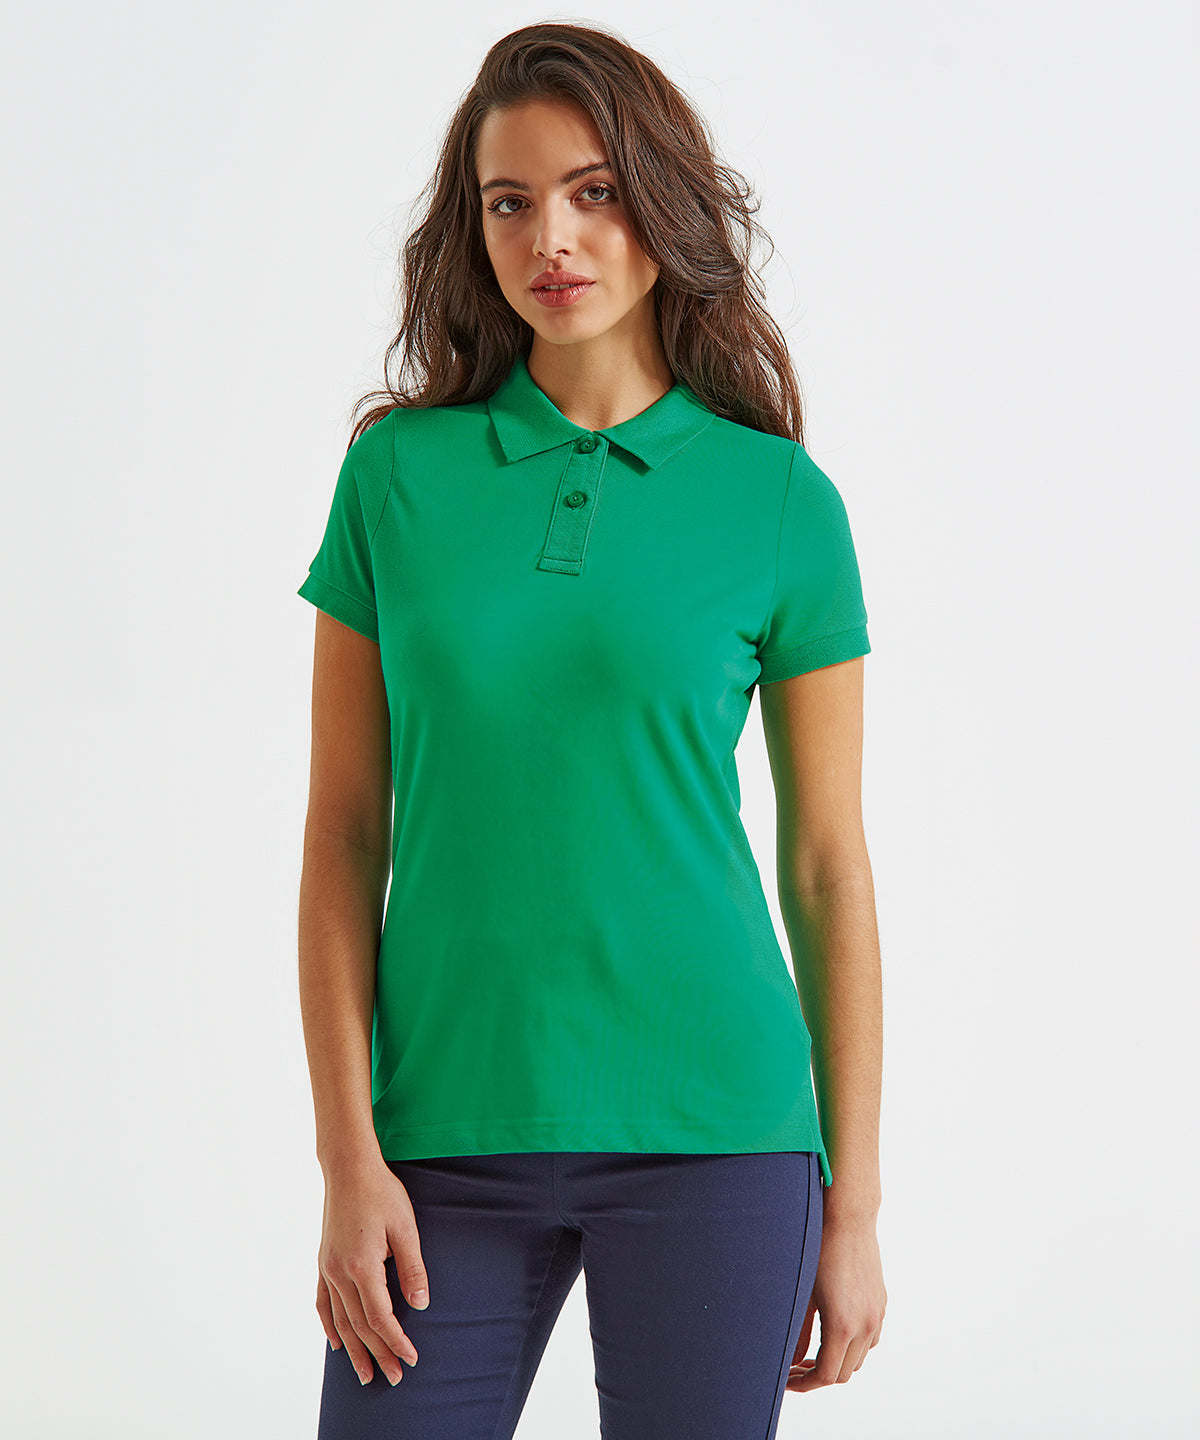 Asquith & Fox Women's Classic Fit Polo